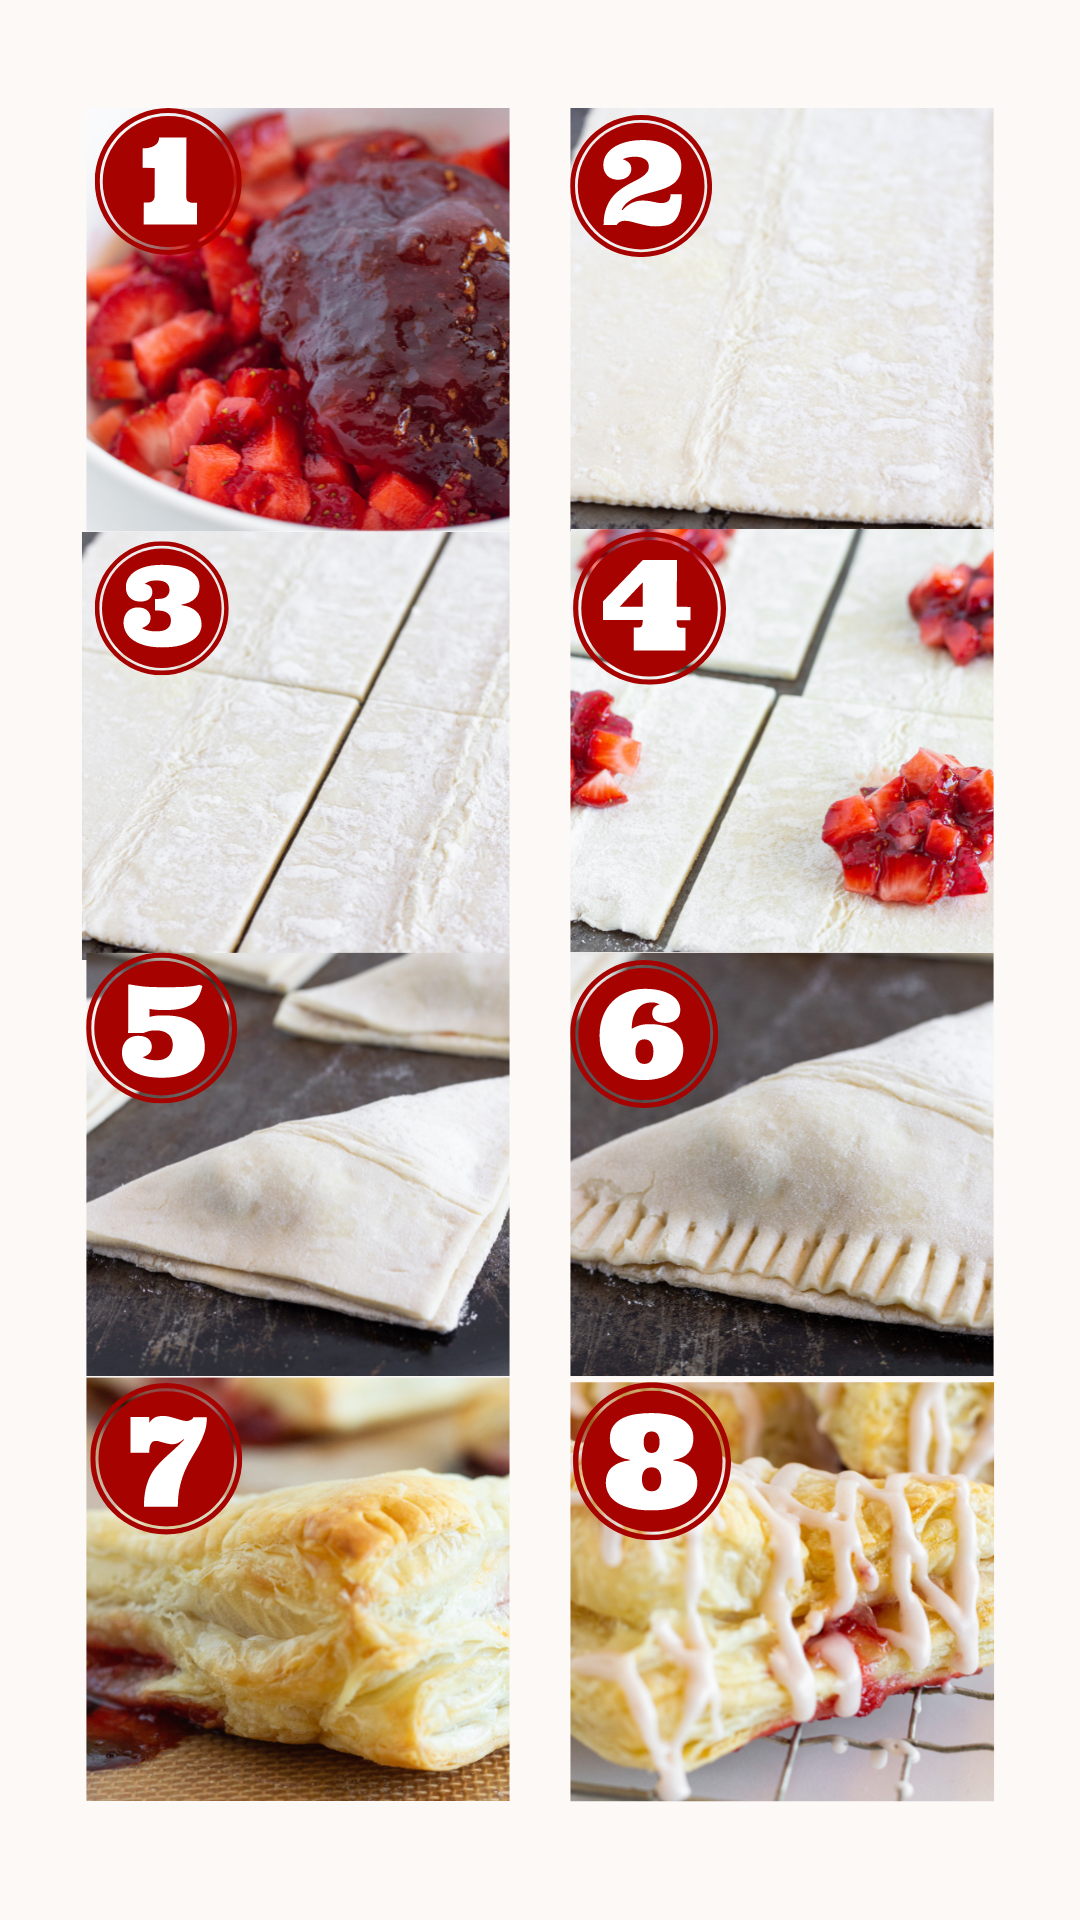 Steps for making Easy Strawberry Turnovers Recipe, by Top US dessert blog Practically Homemade